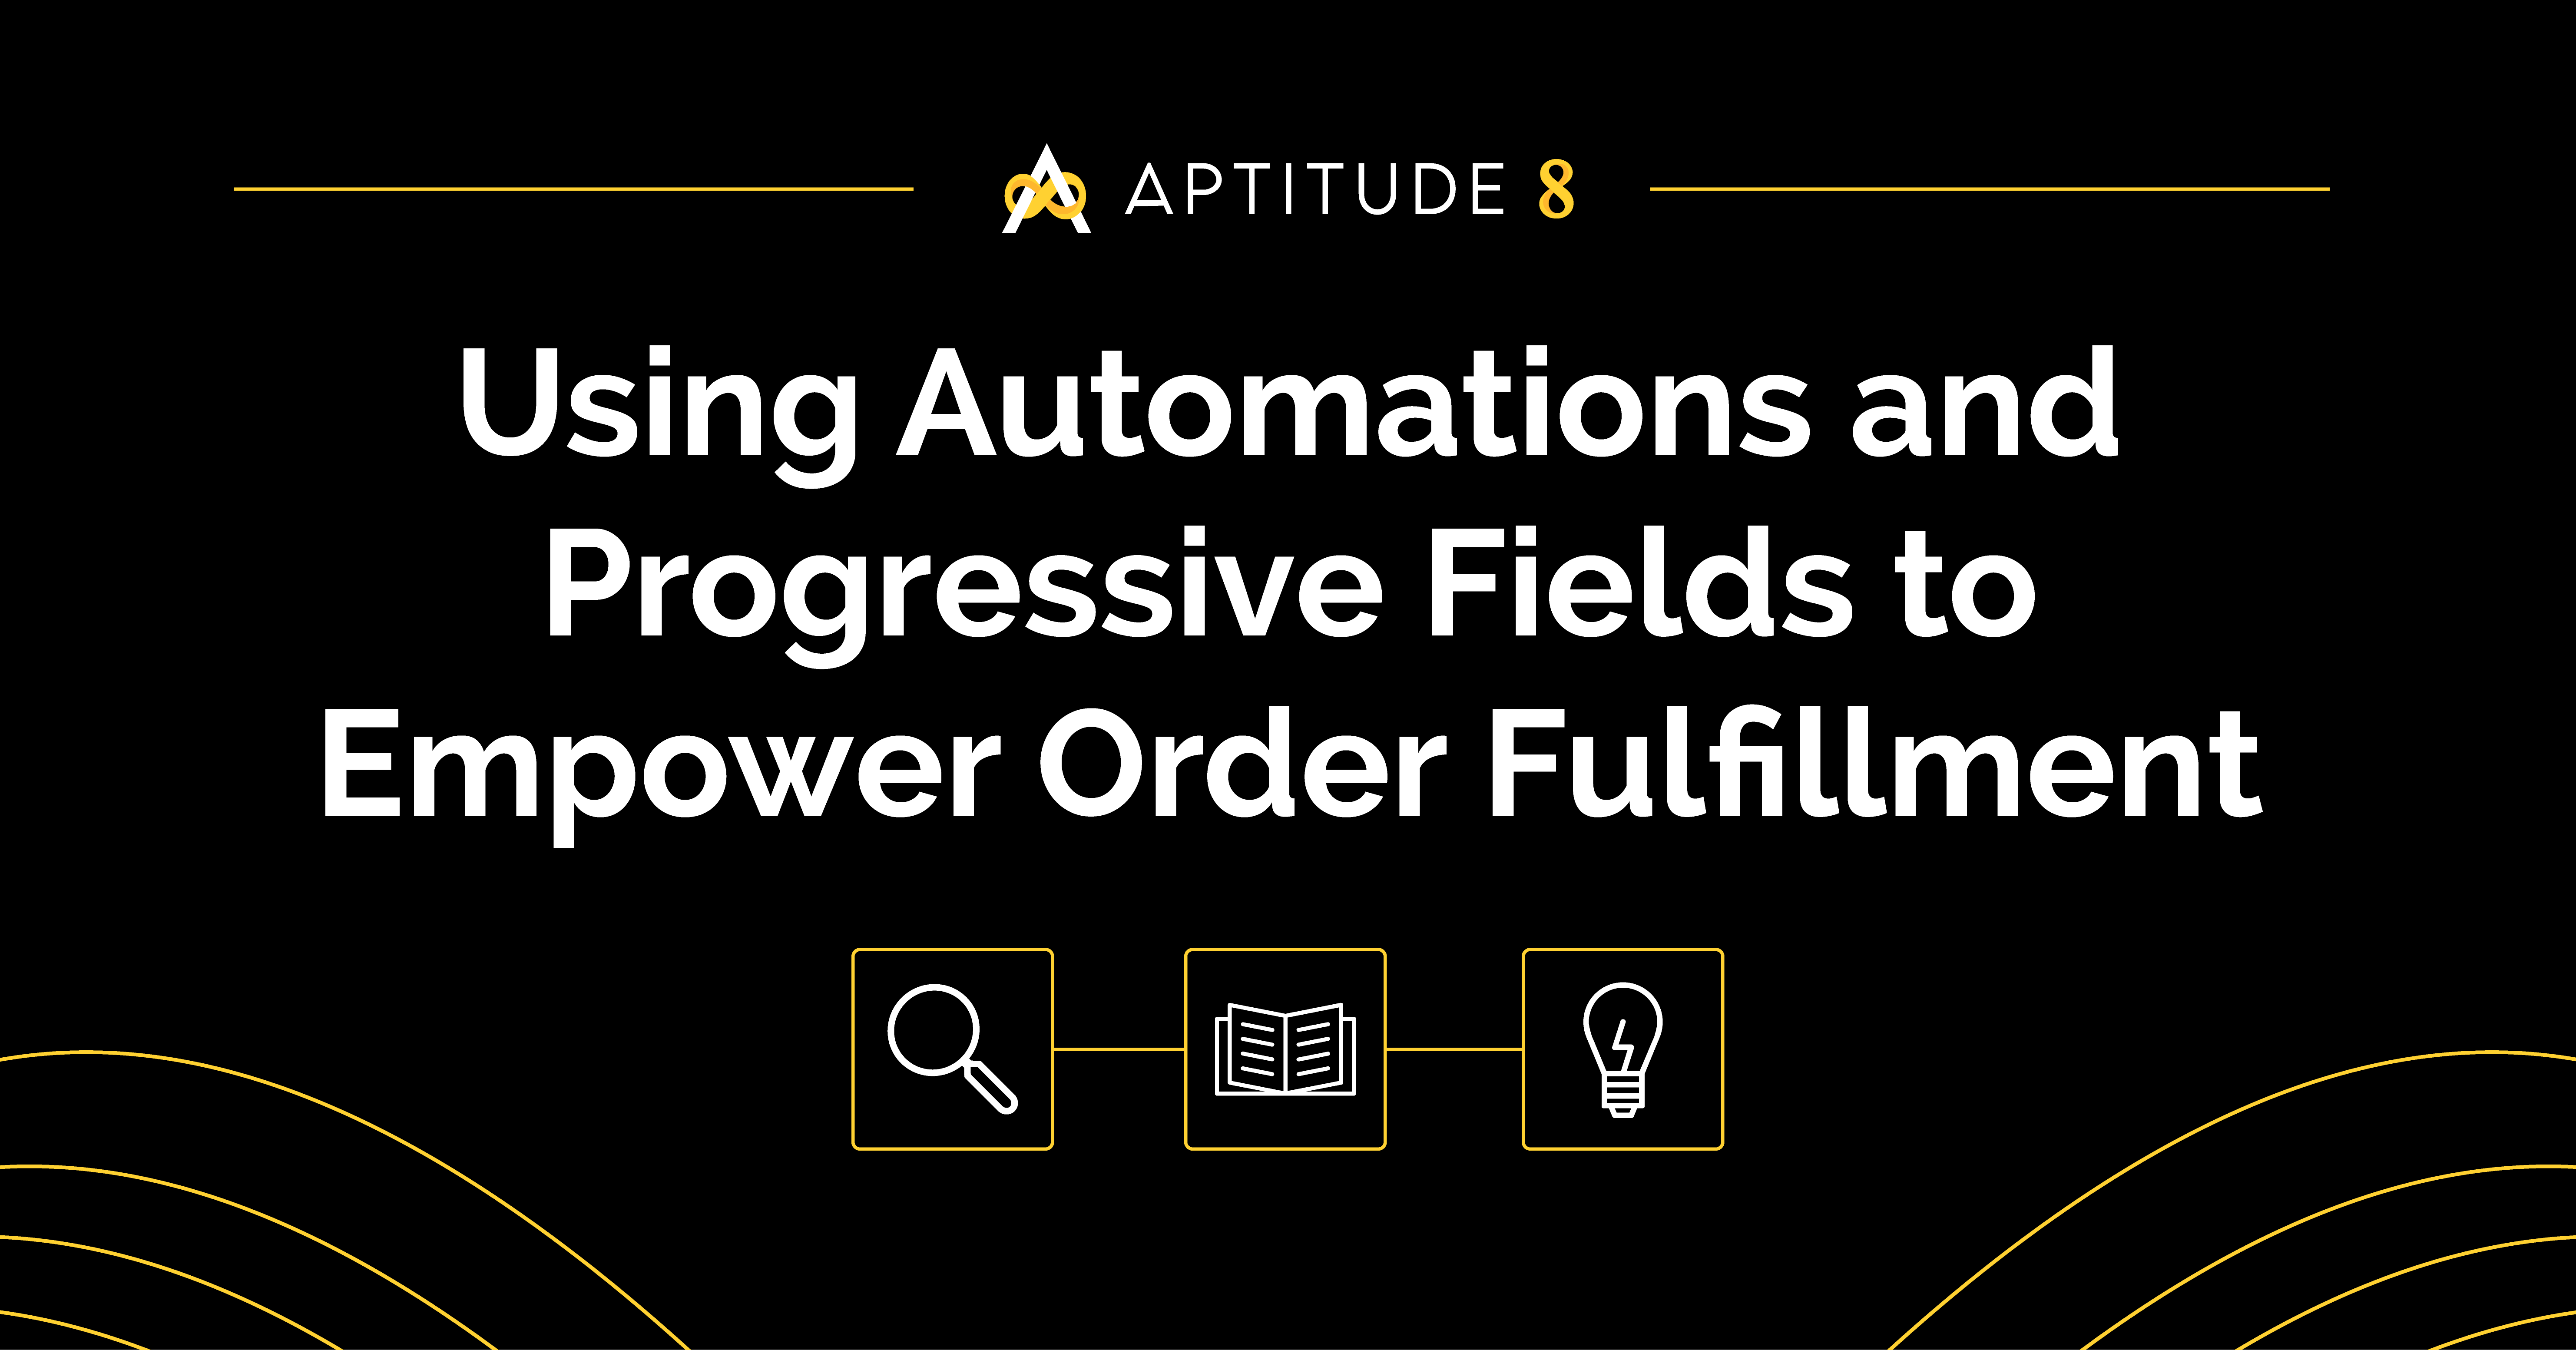 Using Automations and Progressive Fields to Empower Order Fulfillment